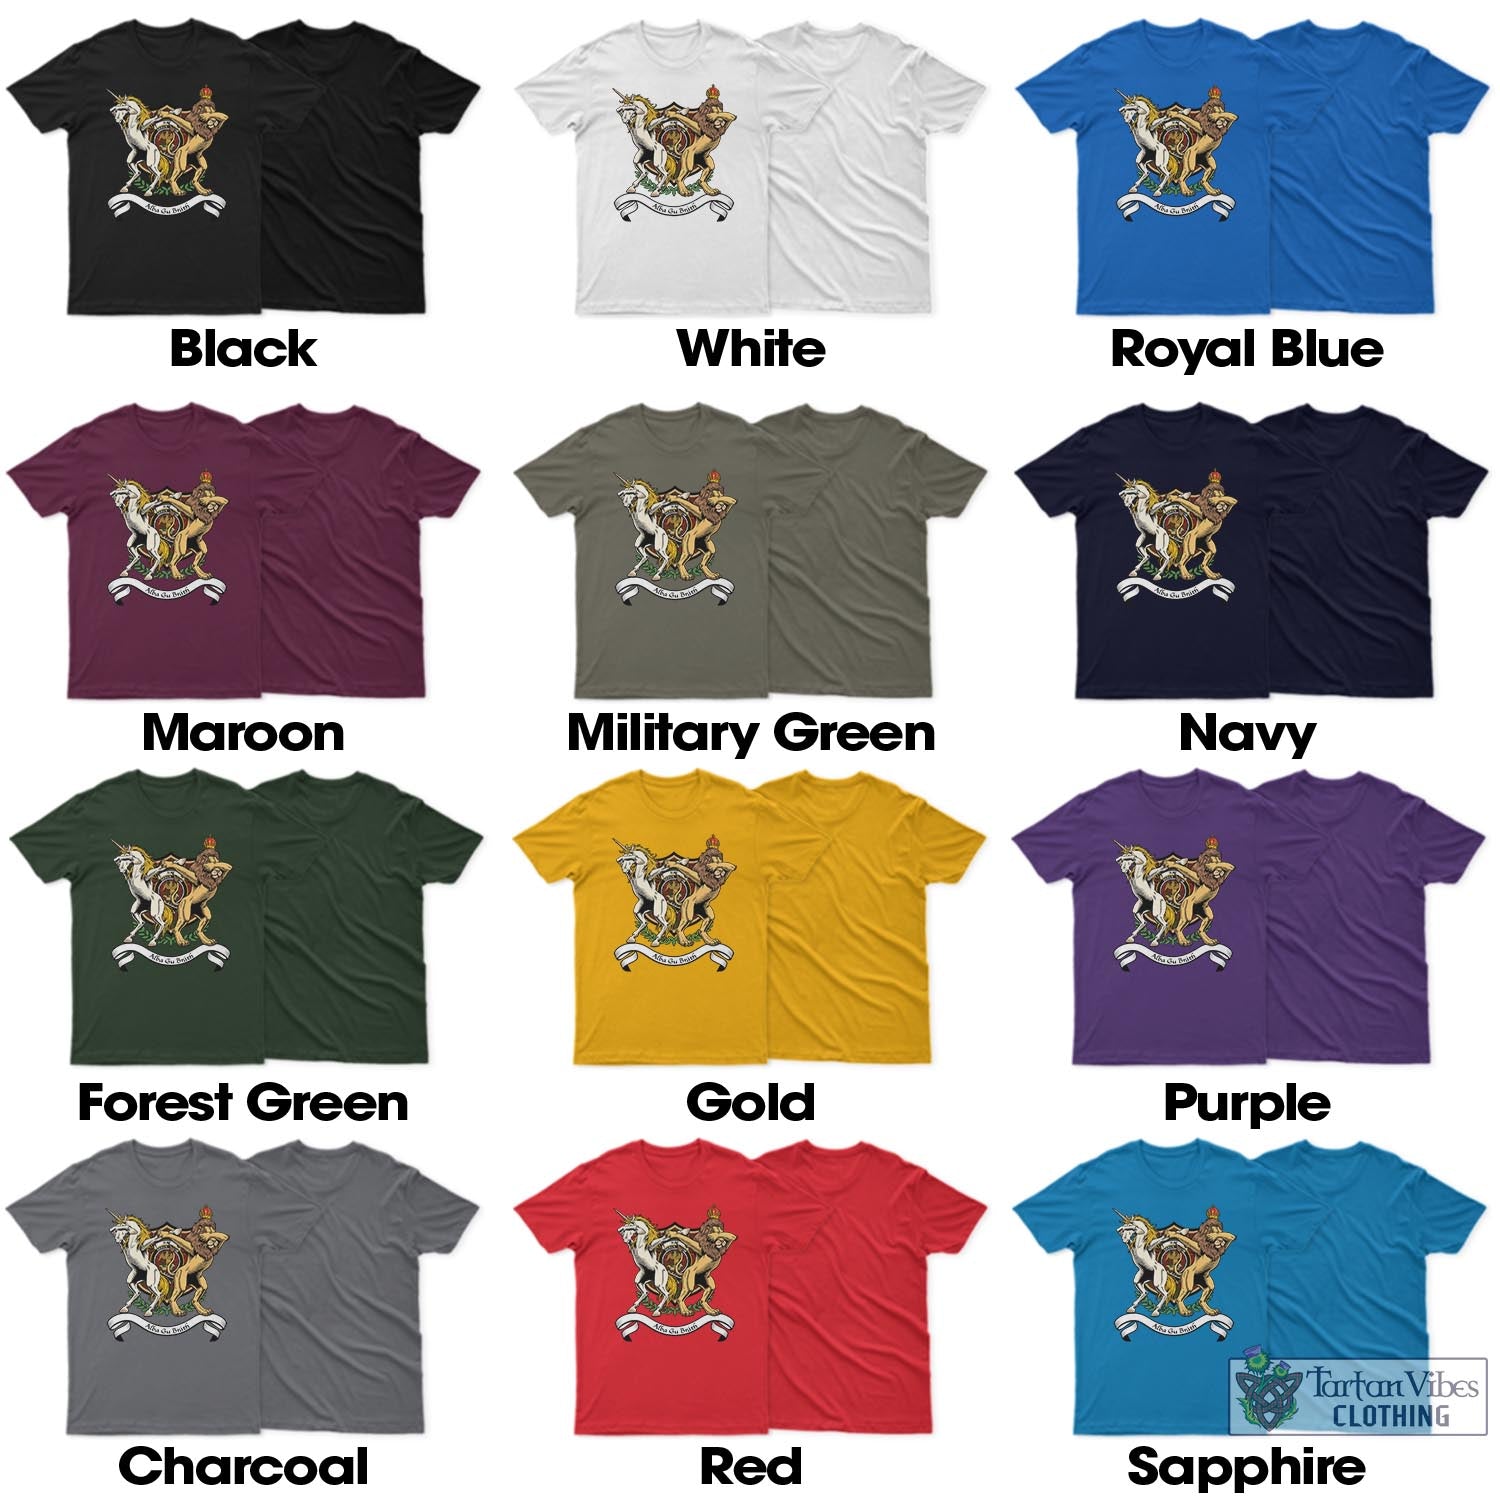 Tartan Vibes Clothing Hay Family Crest Cotton Men's T-Shirt with Scotland Royal Coat Of Arm Funny Style